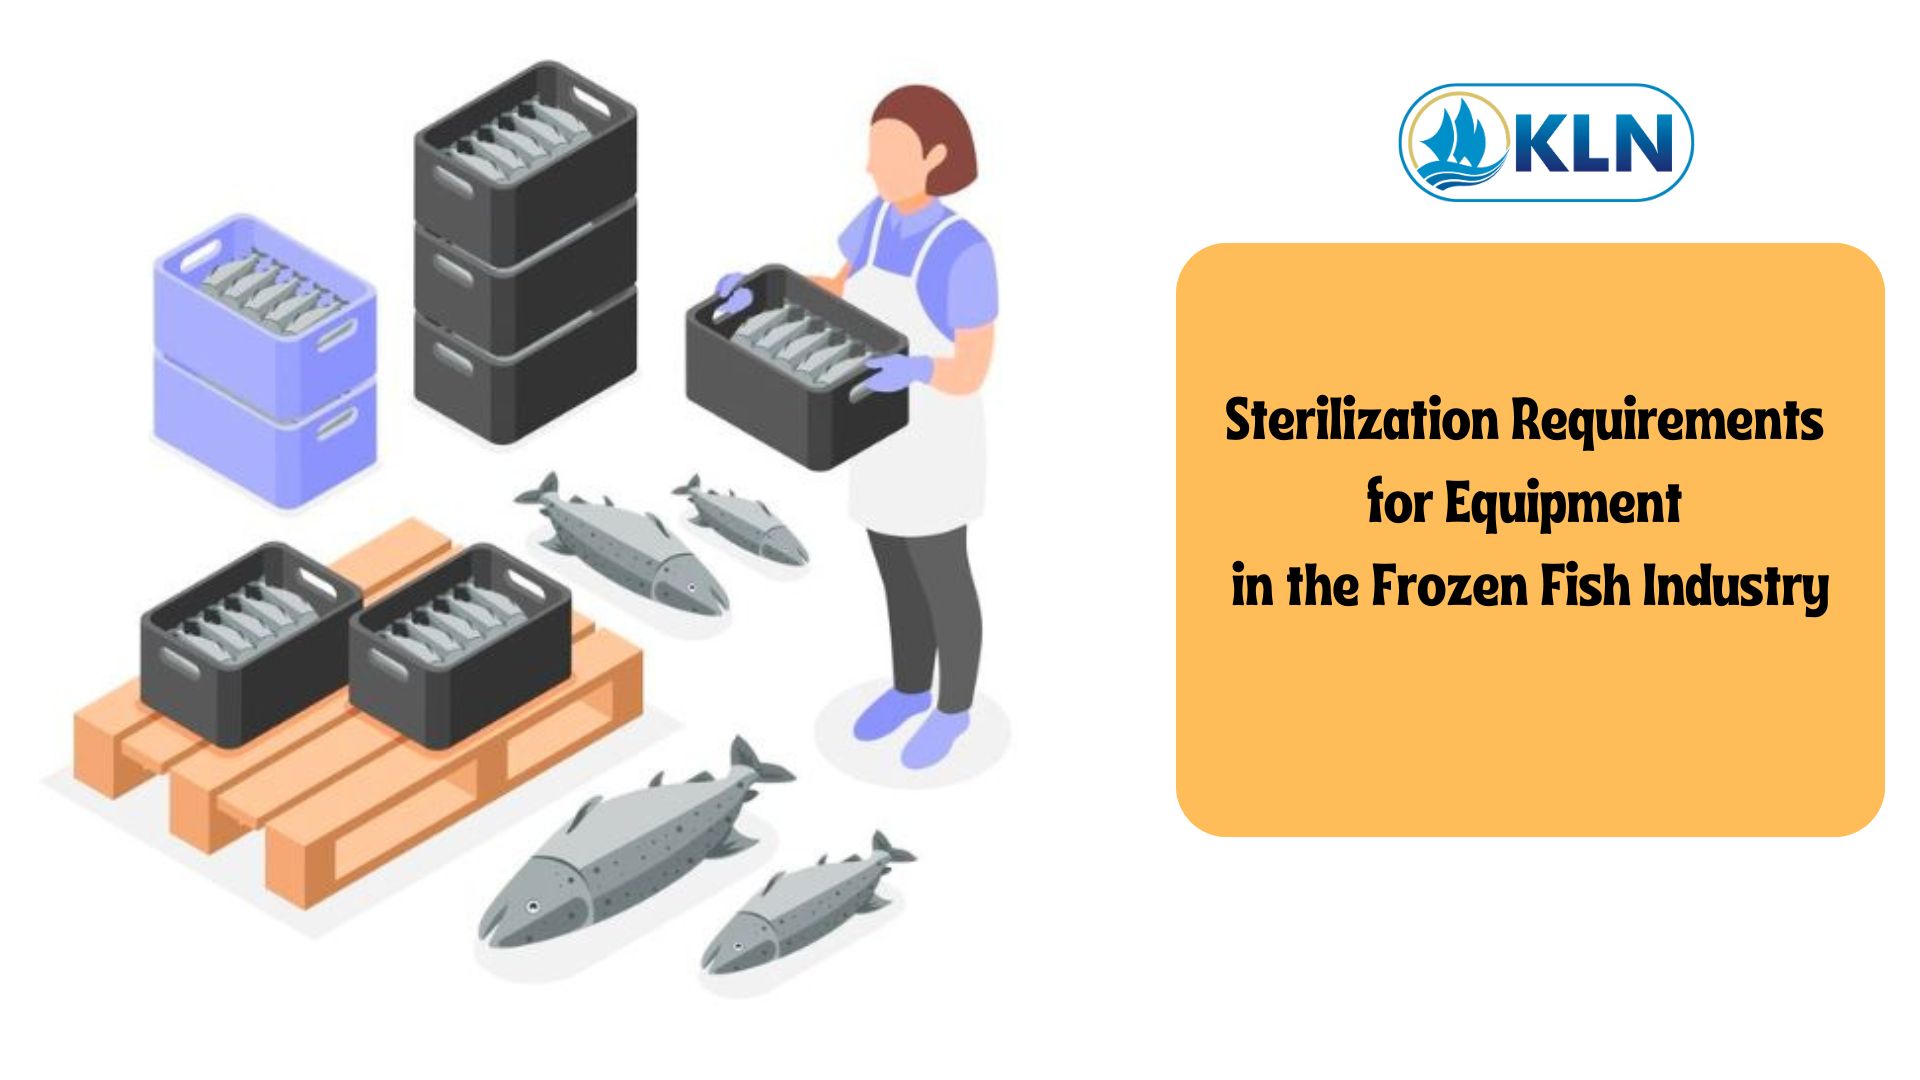 Sterilization Requirements for Equipment in the Frozen Fish Industry